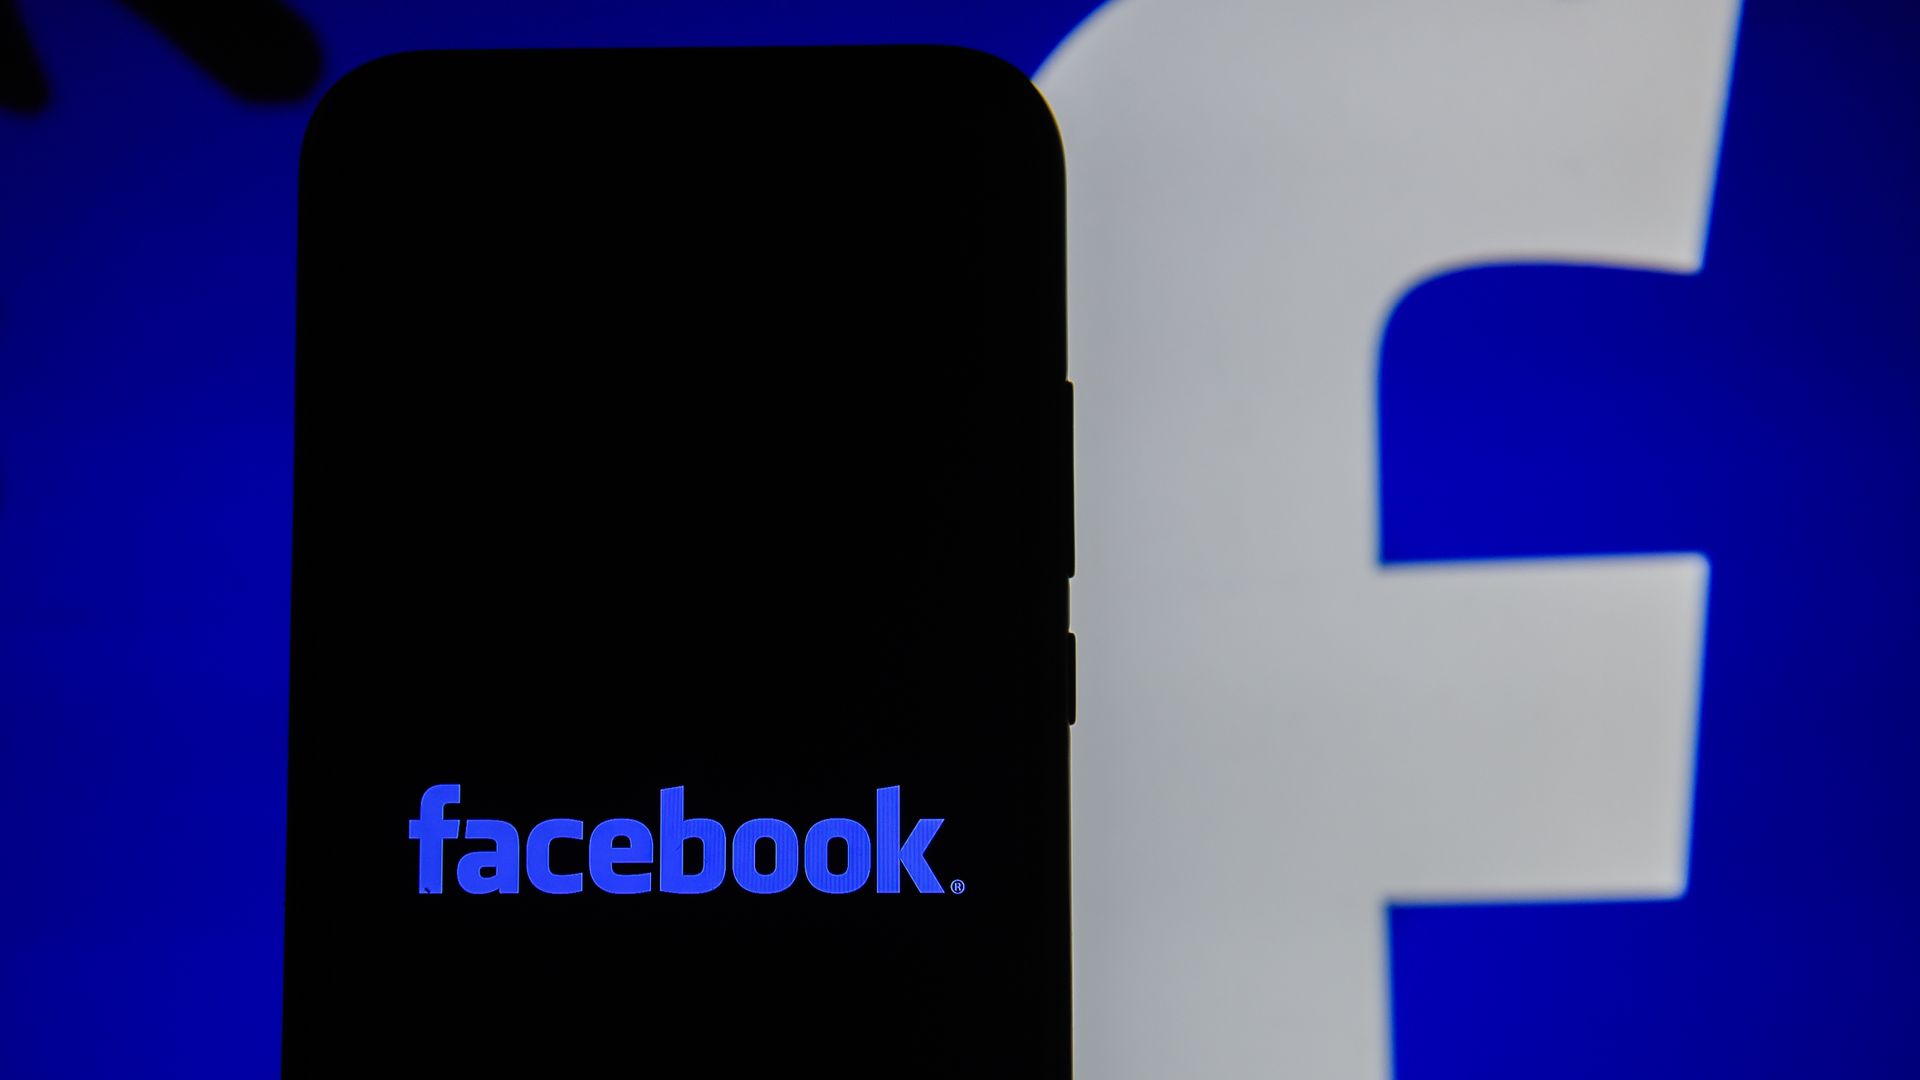 This image shows the Facebook logo 